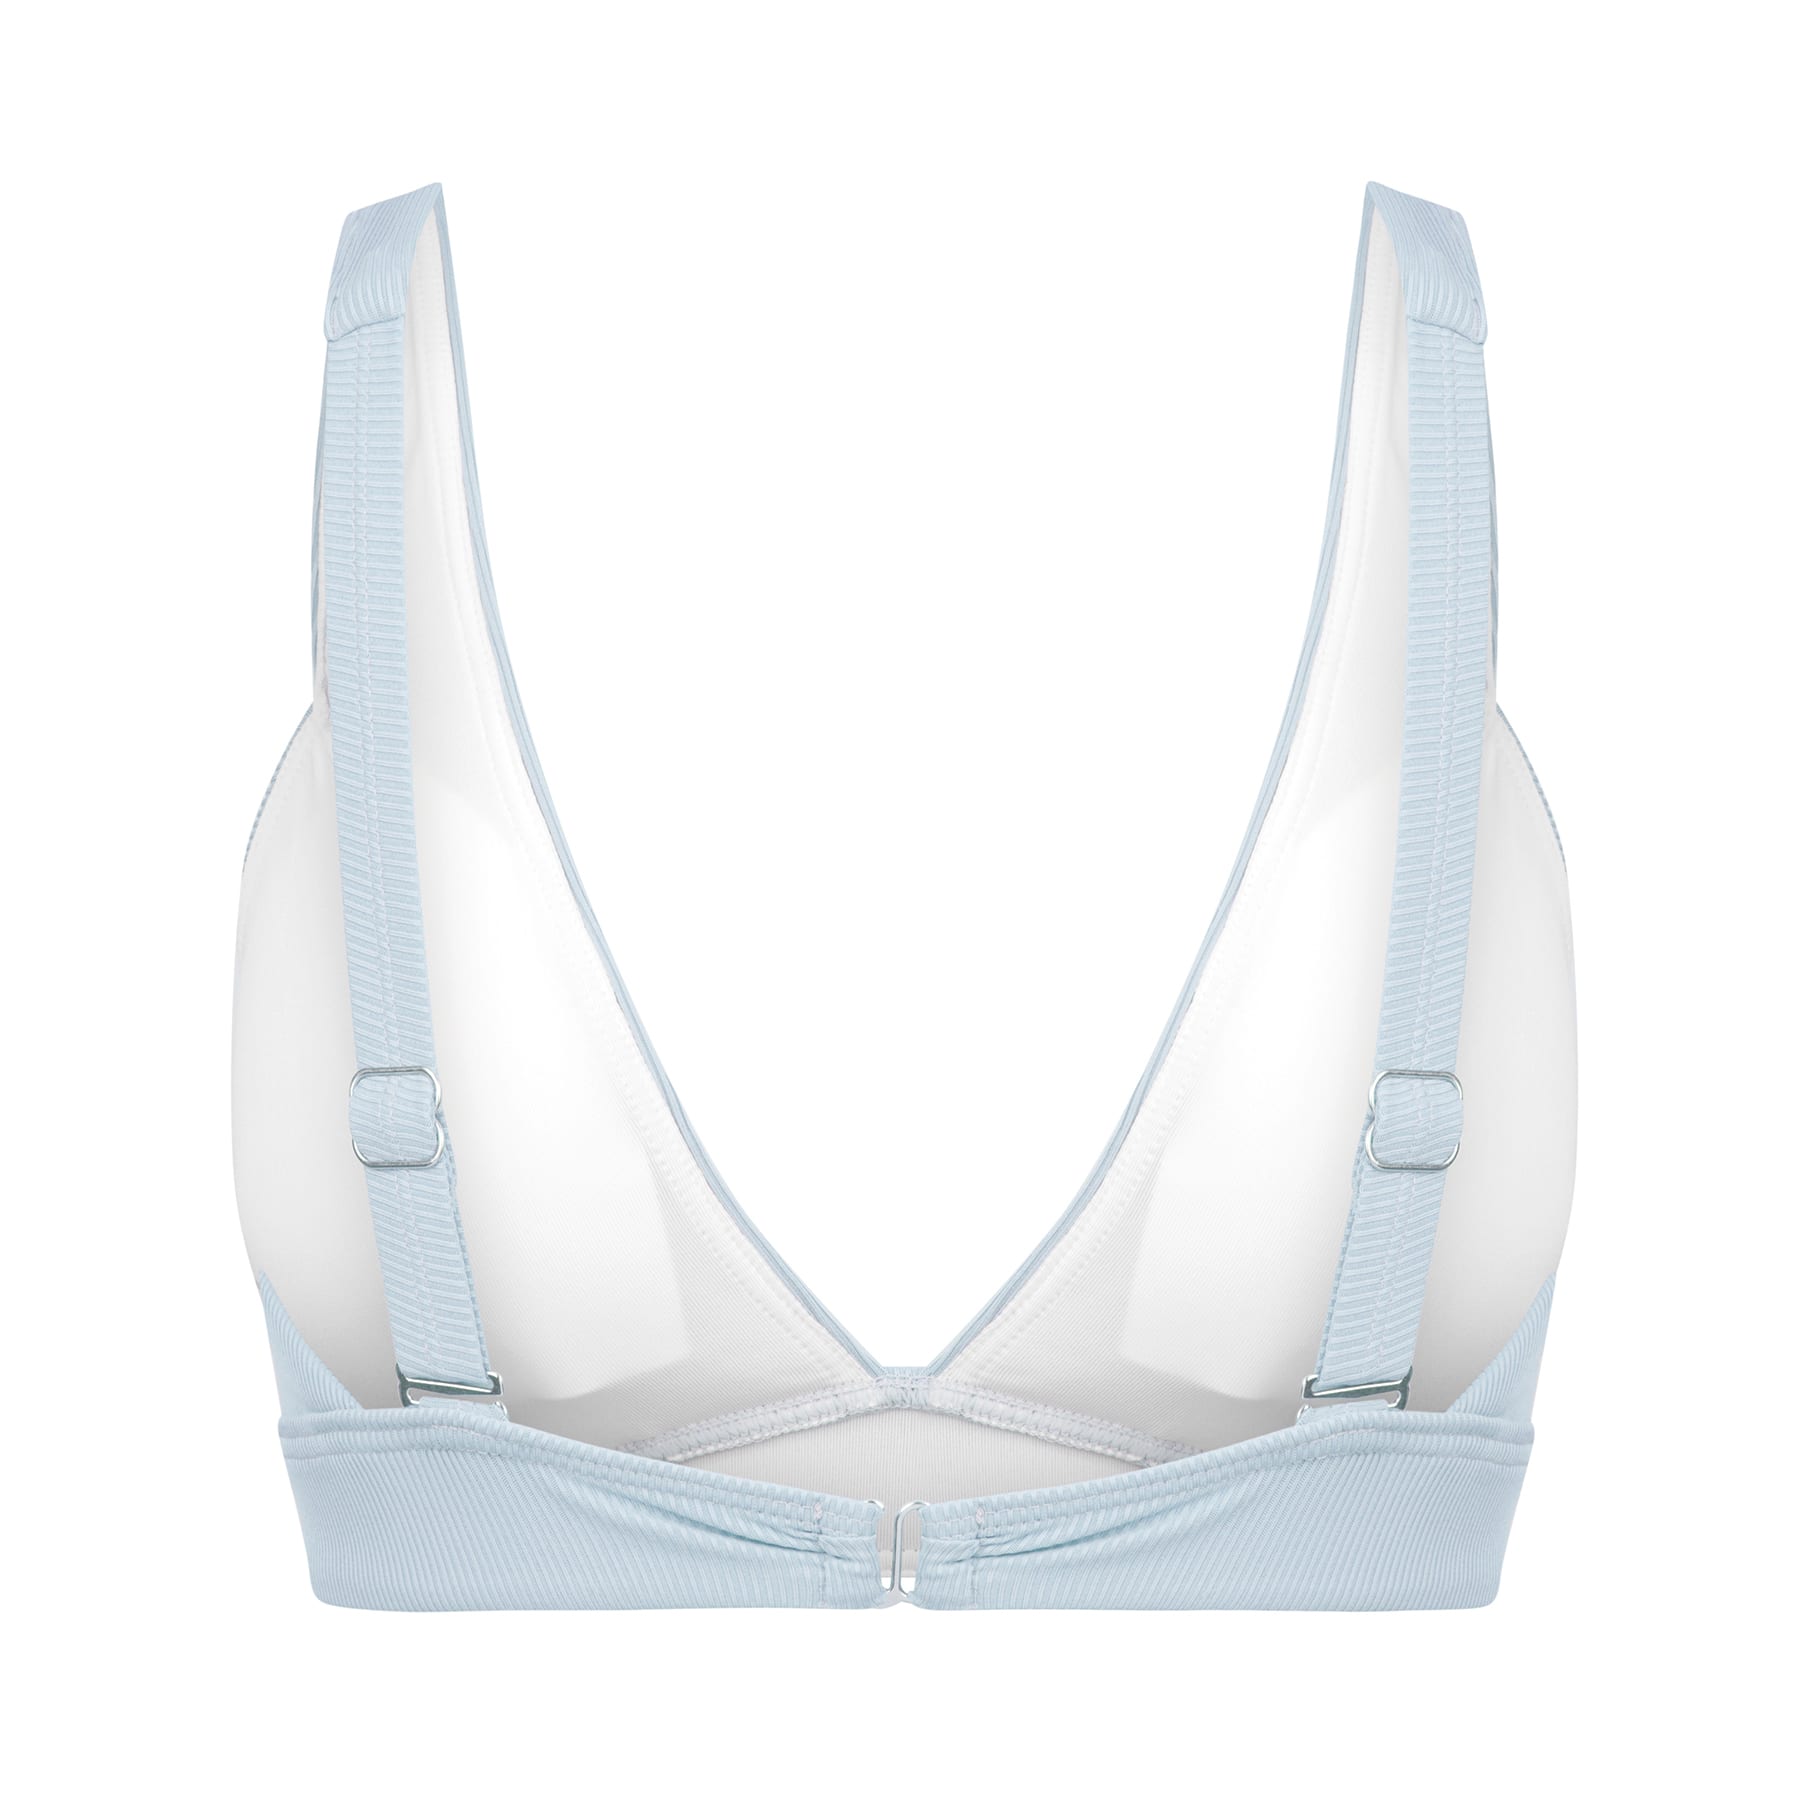 Lola Triangle Top FINAL SALE - Baby Blue Ribbed